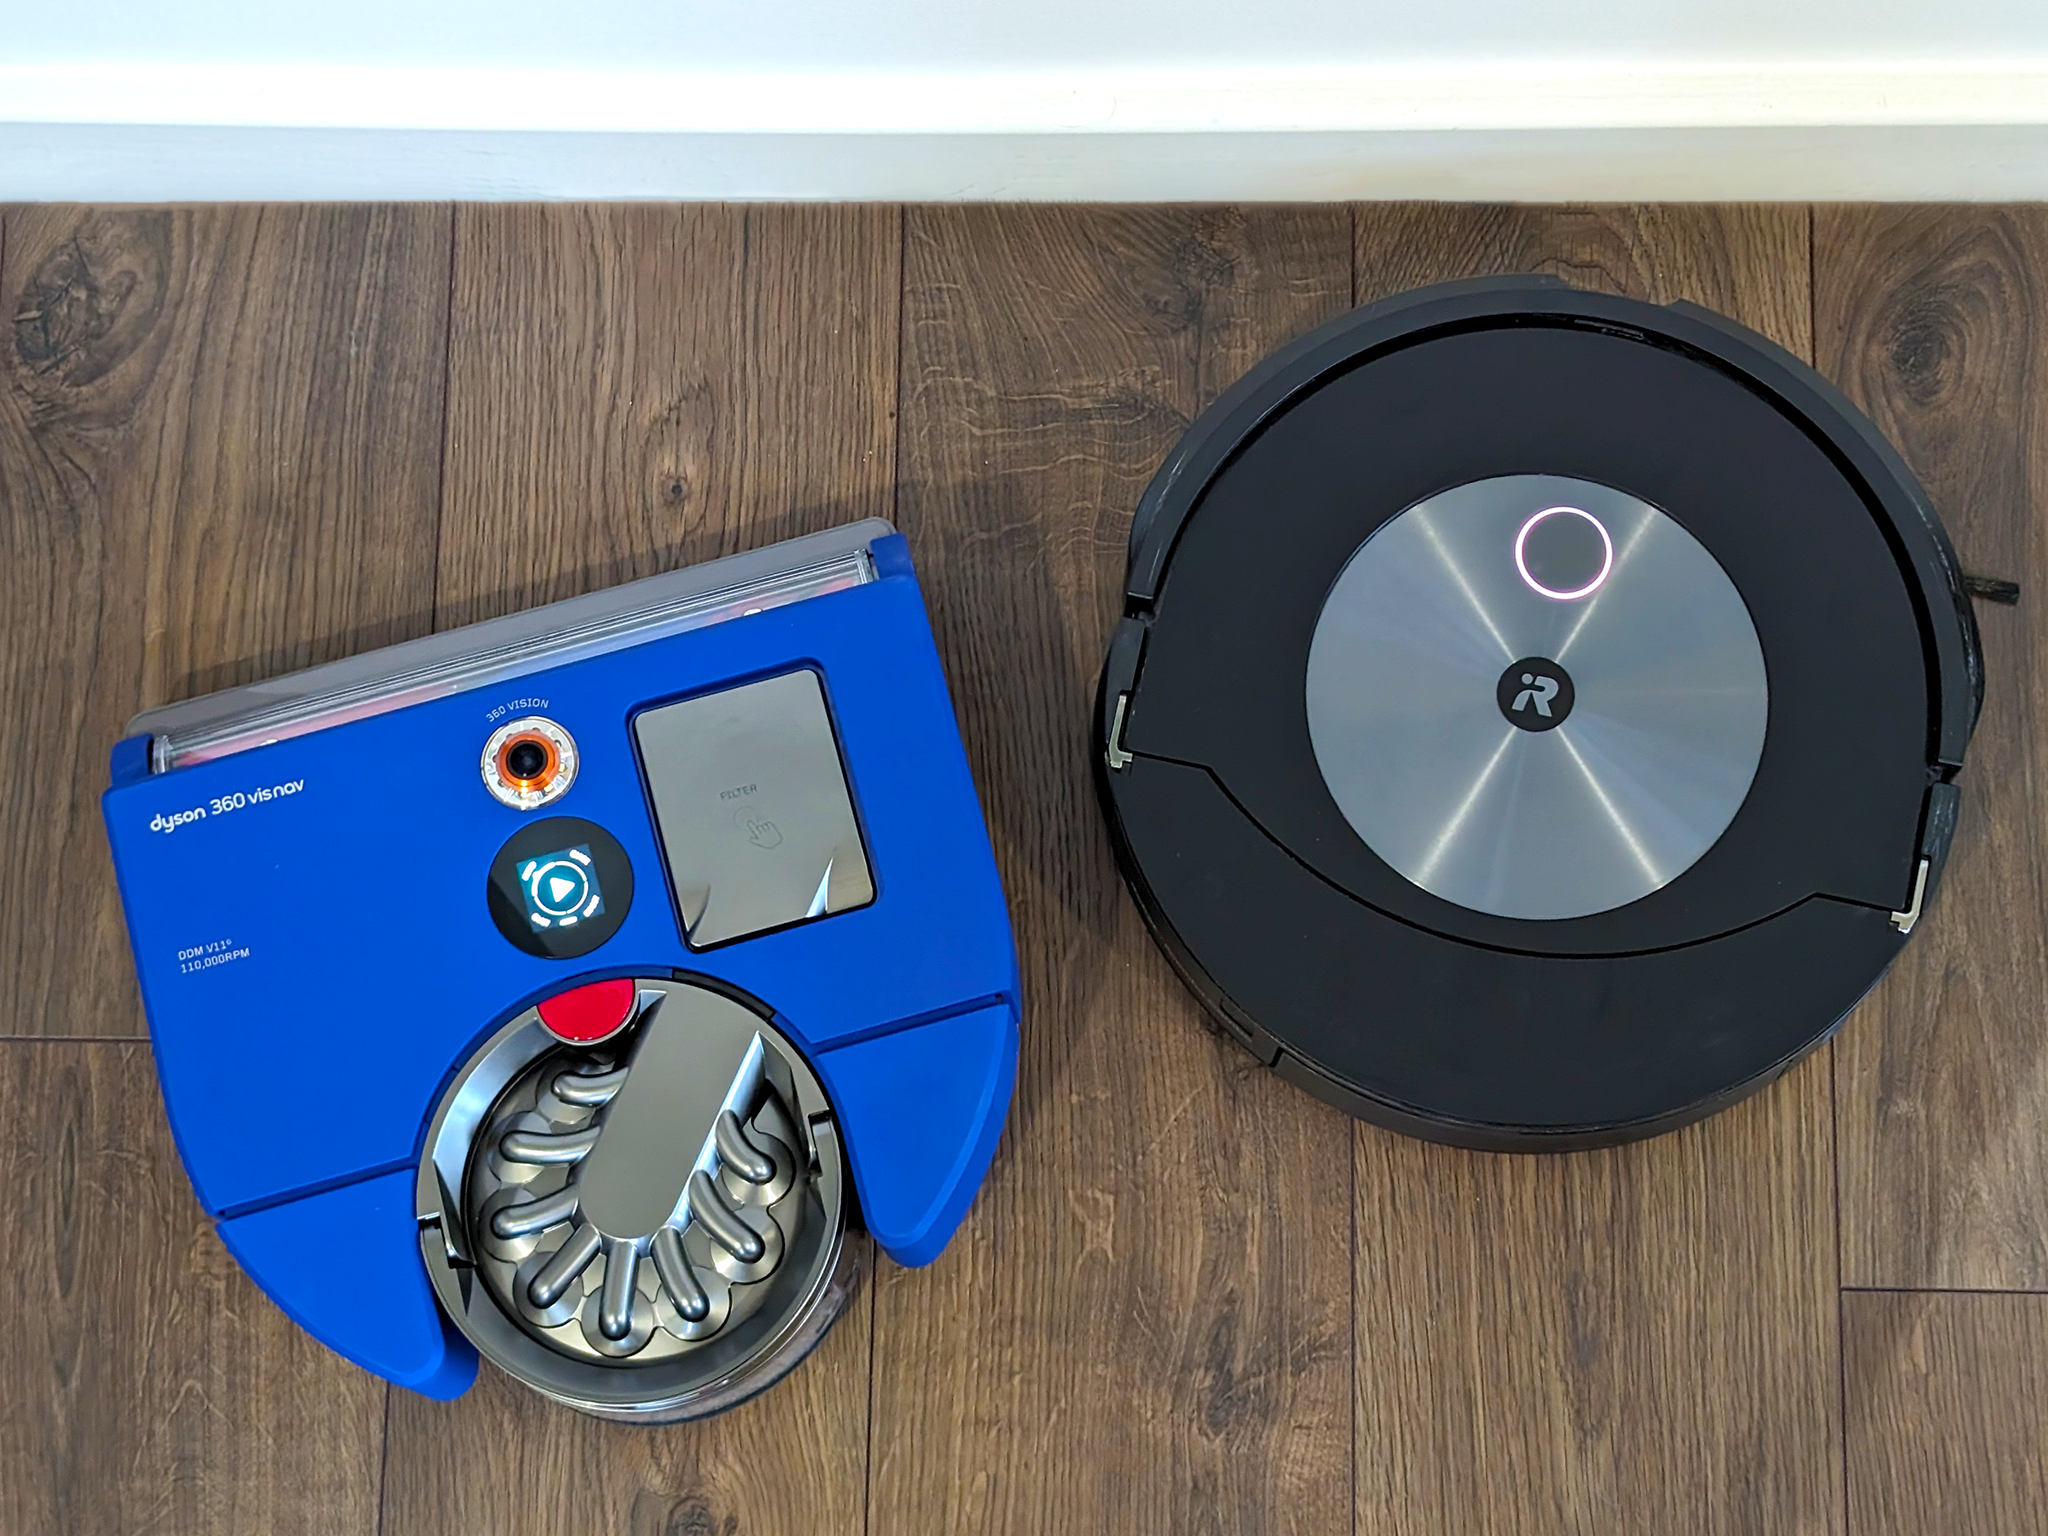 We pitted the two robot vacuum cleaners against each other